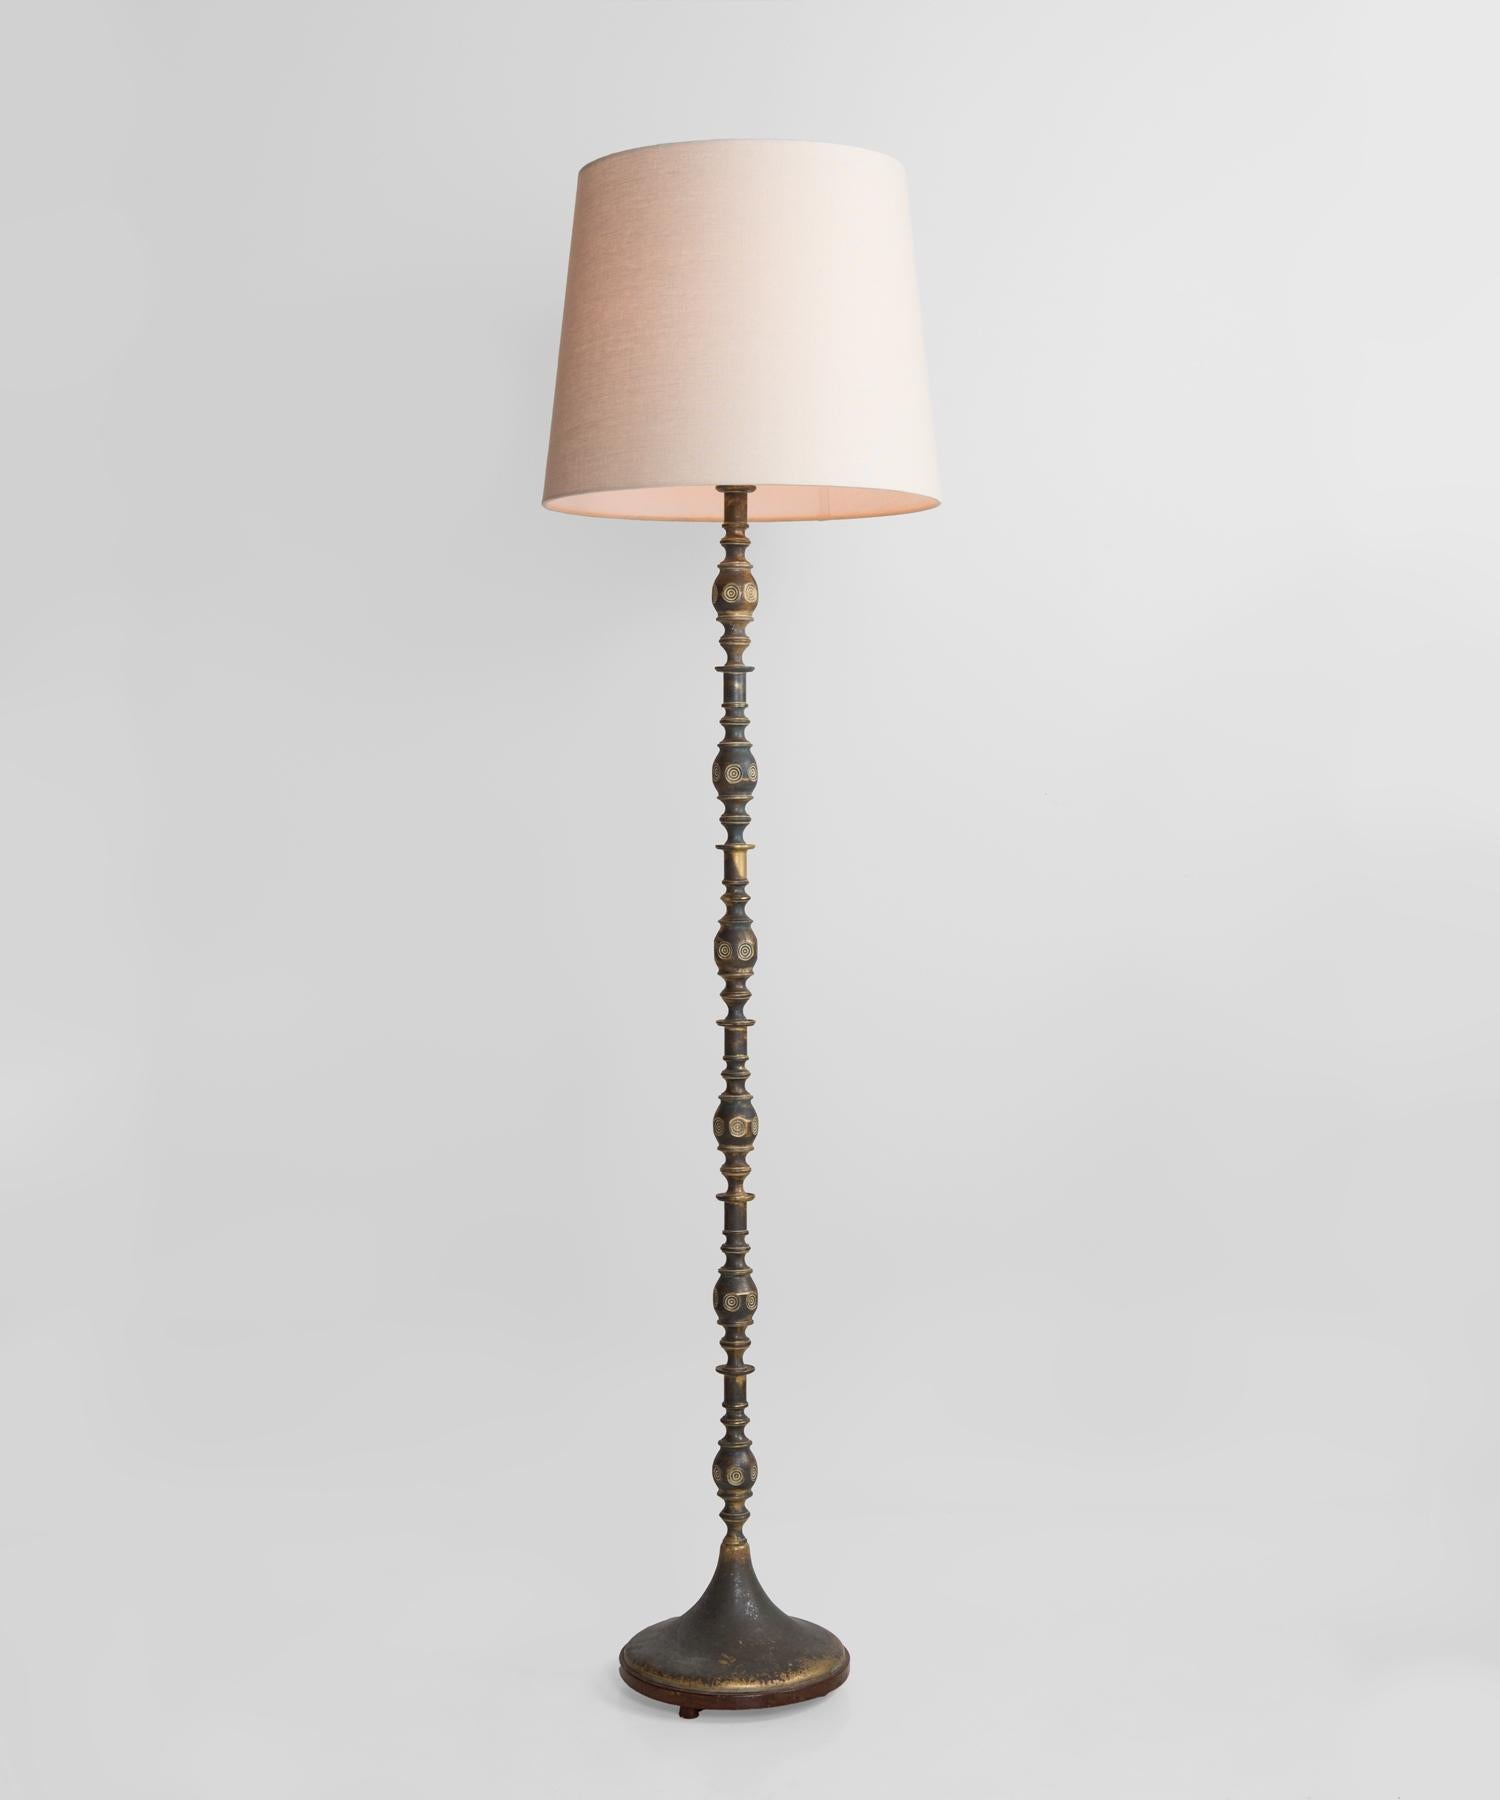 Edwardian brass standard lamp, England, circa 1900.

Solid brass stand with decorative form, and new linen shade.